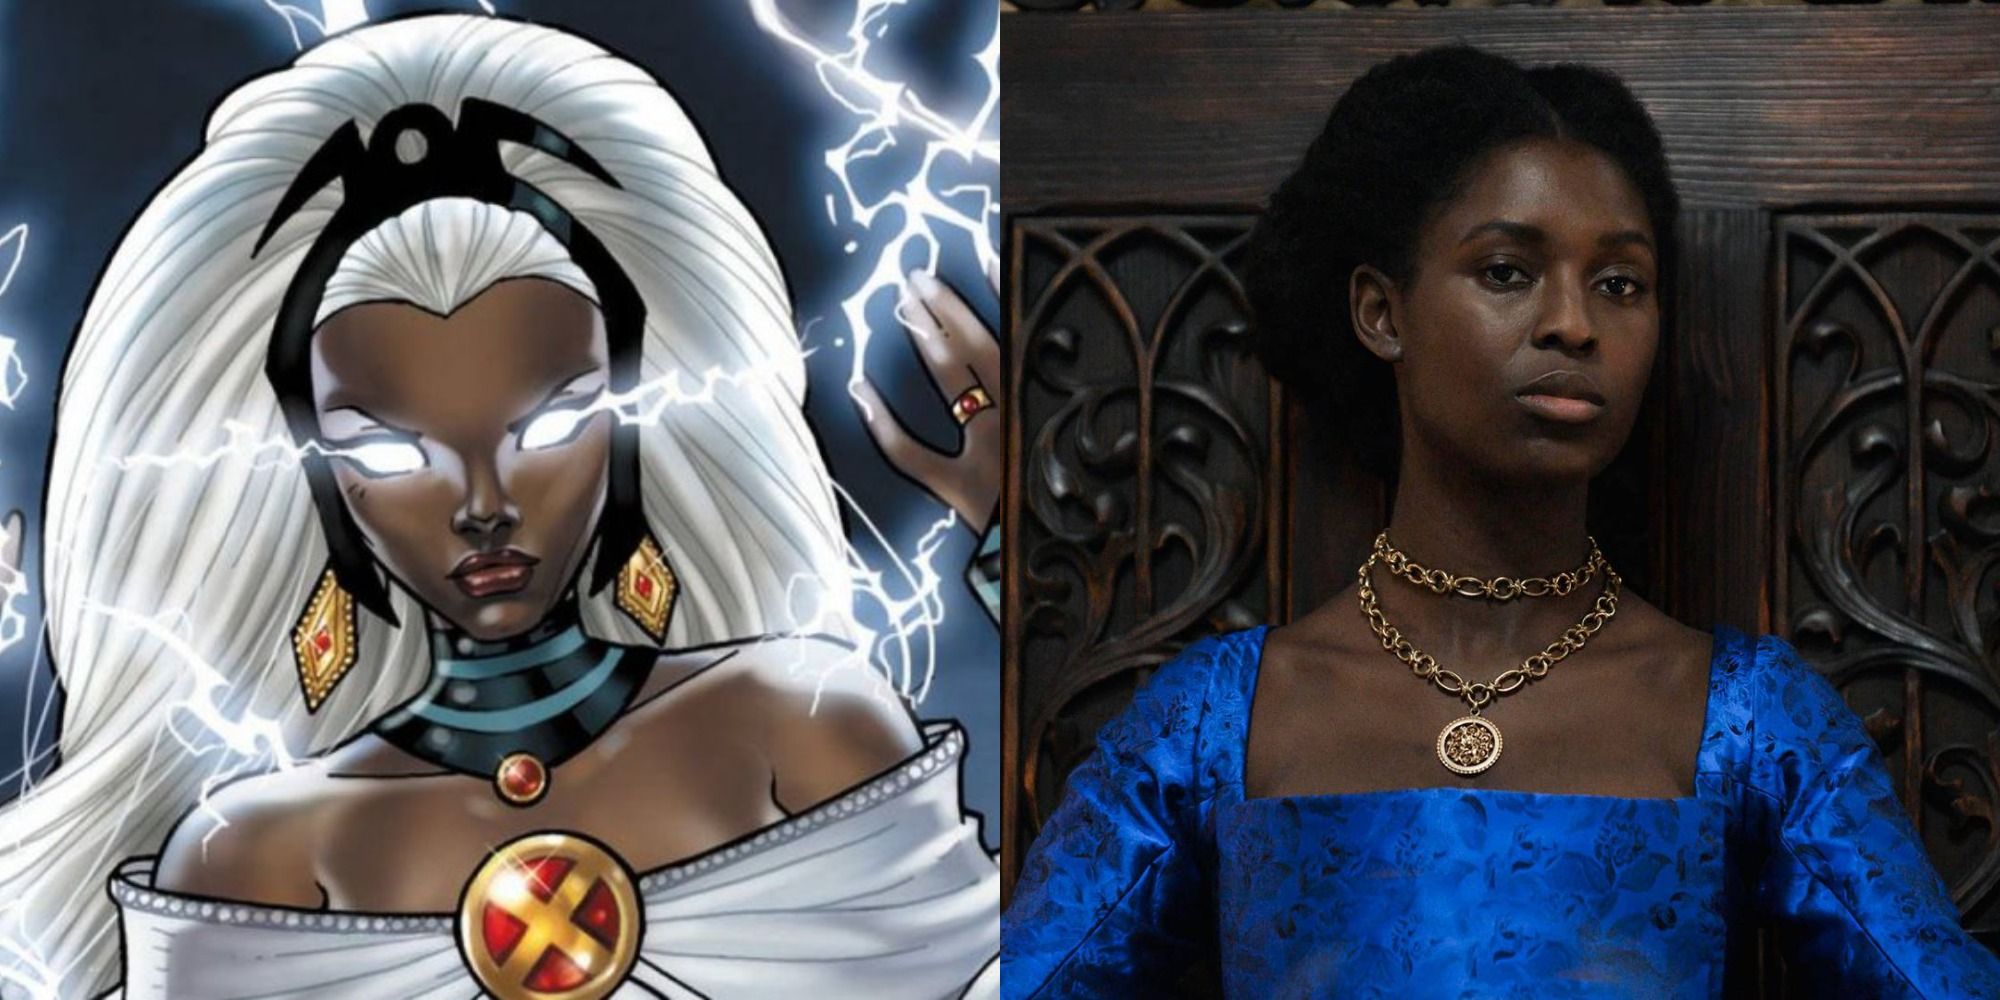 Jodi Turner Smith as Anne Boelyn and Storm in X-Men